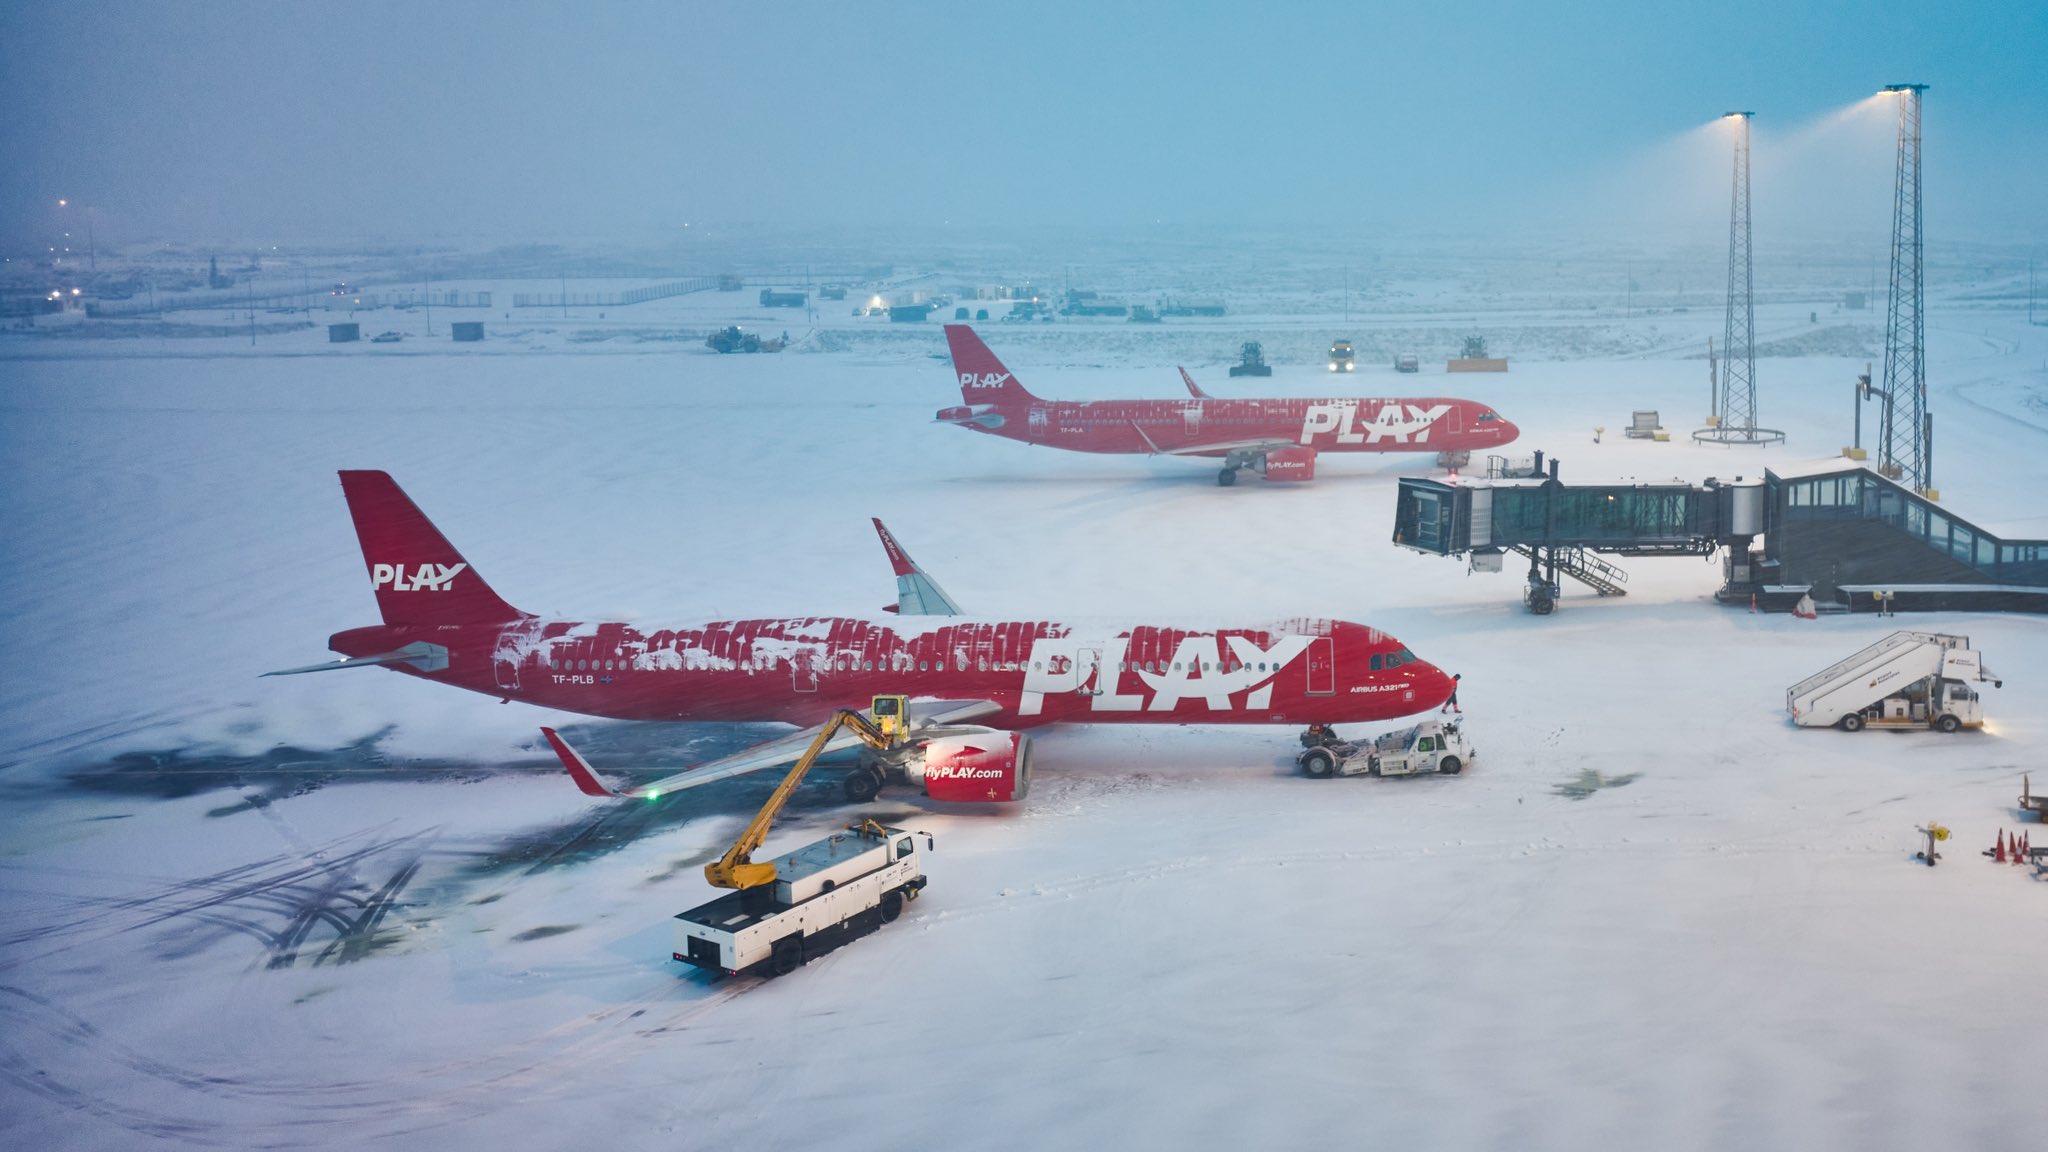 Photo: PLAY Airlines